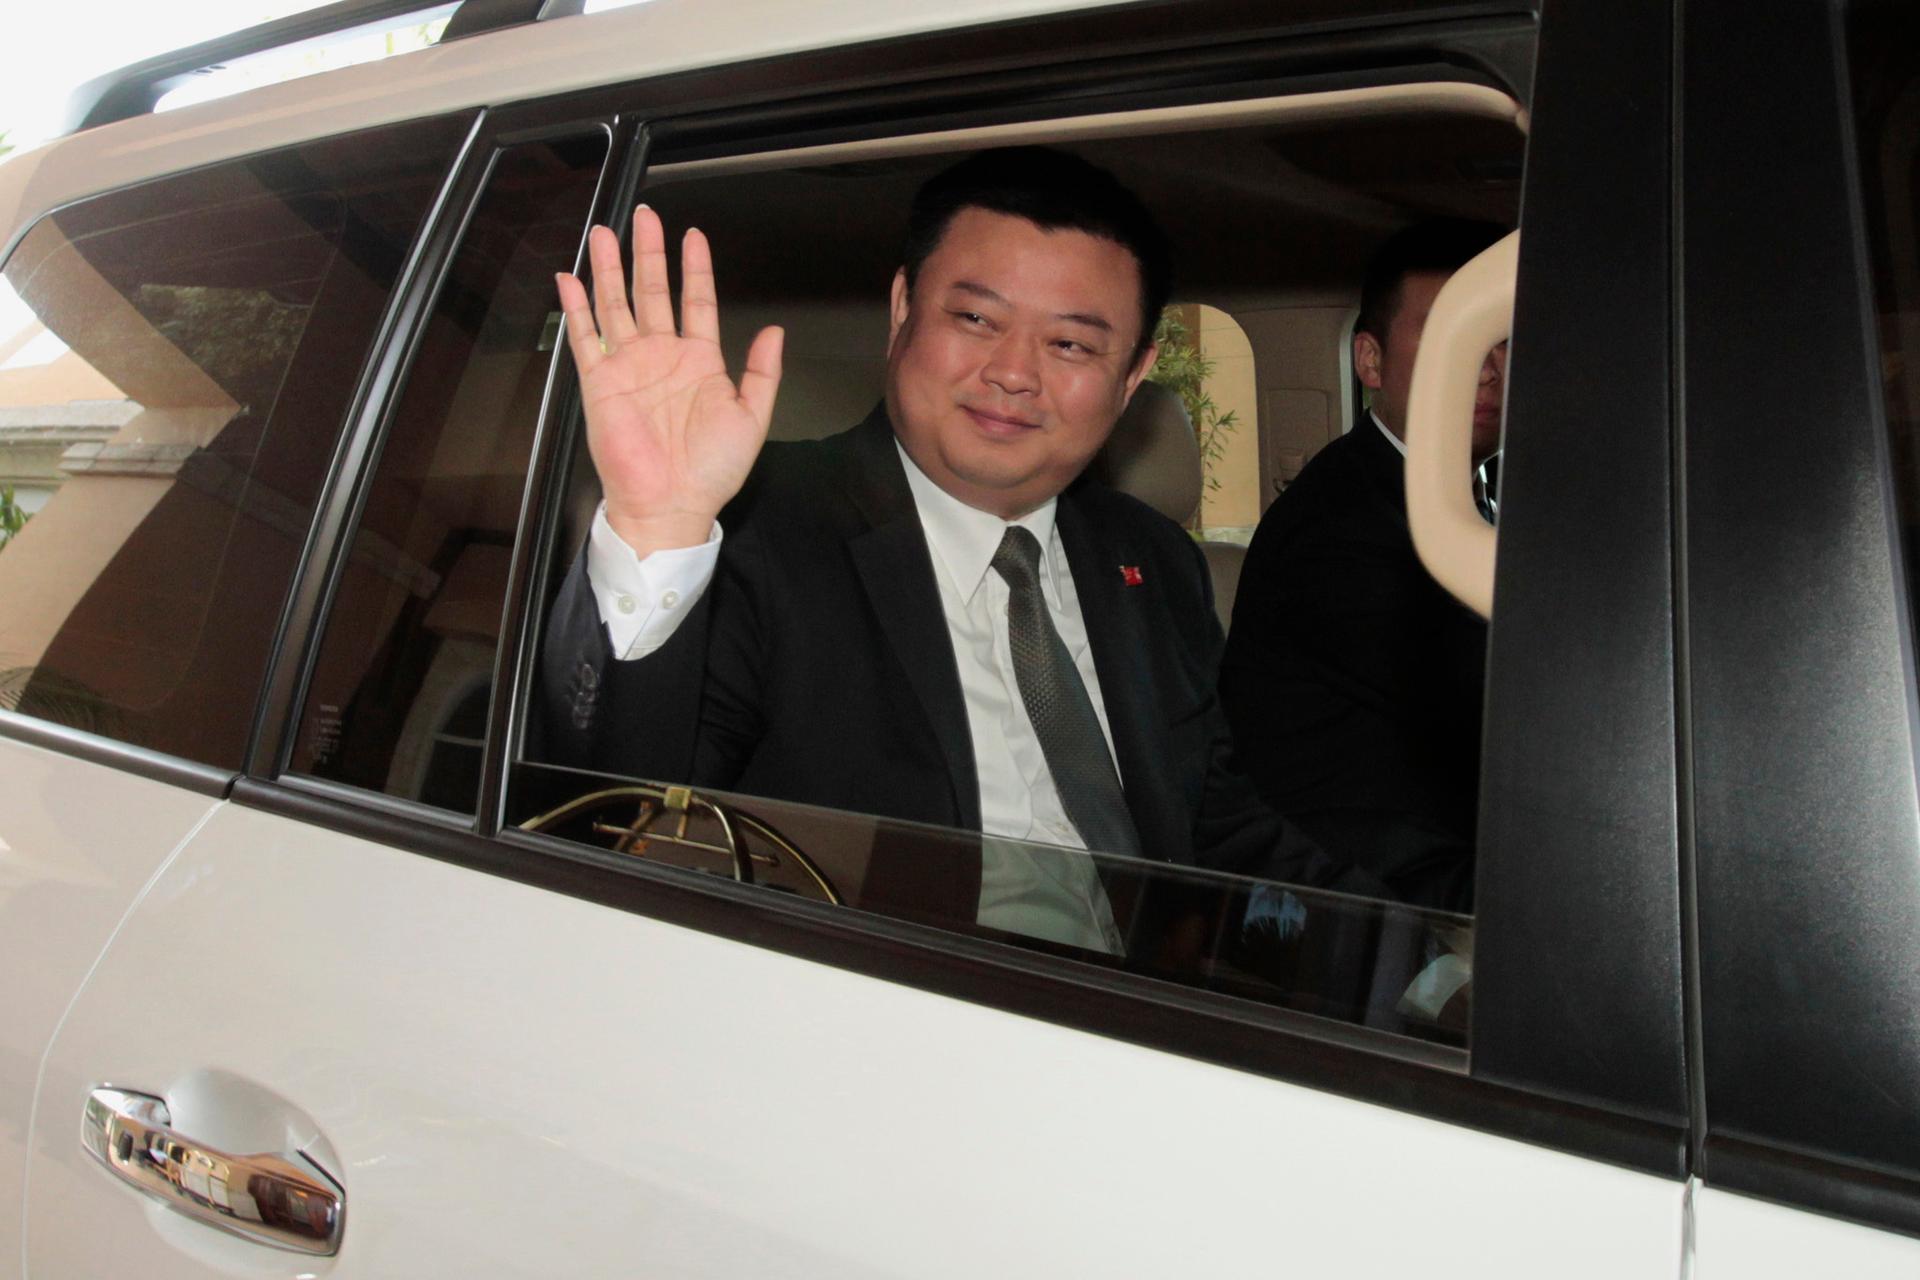 HK Nicaragua Canal Development Investment Co Ltd (HKND Group) chairman Wang Jing waves after attending a media conference in Managua December 23, 2014.